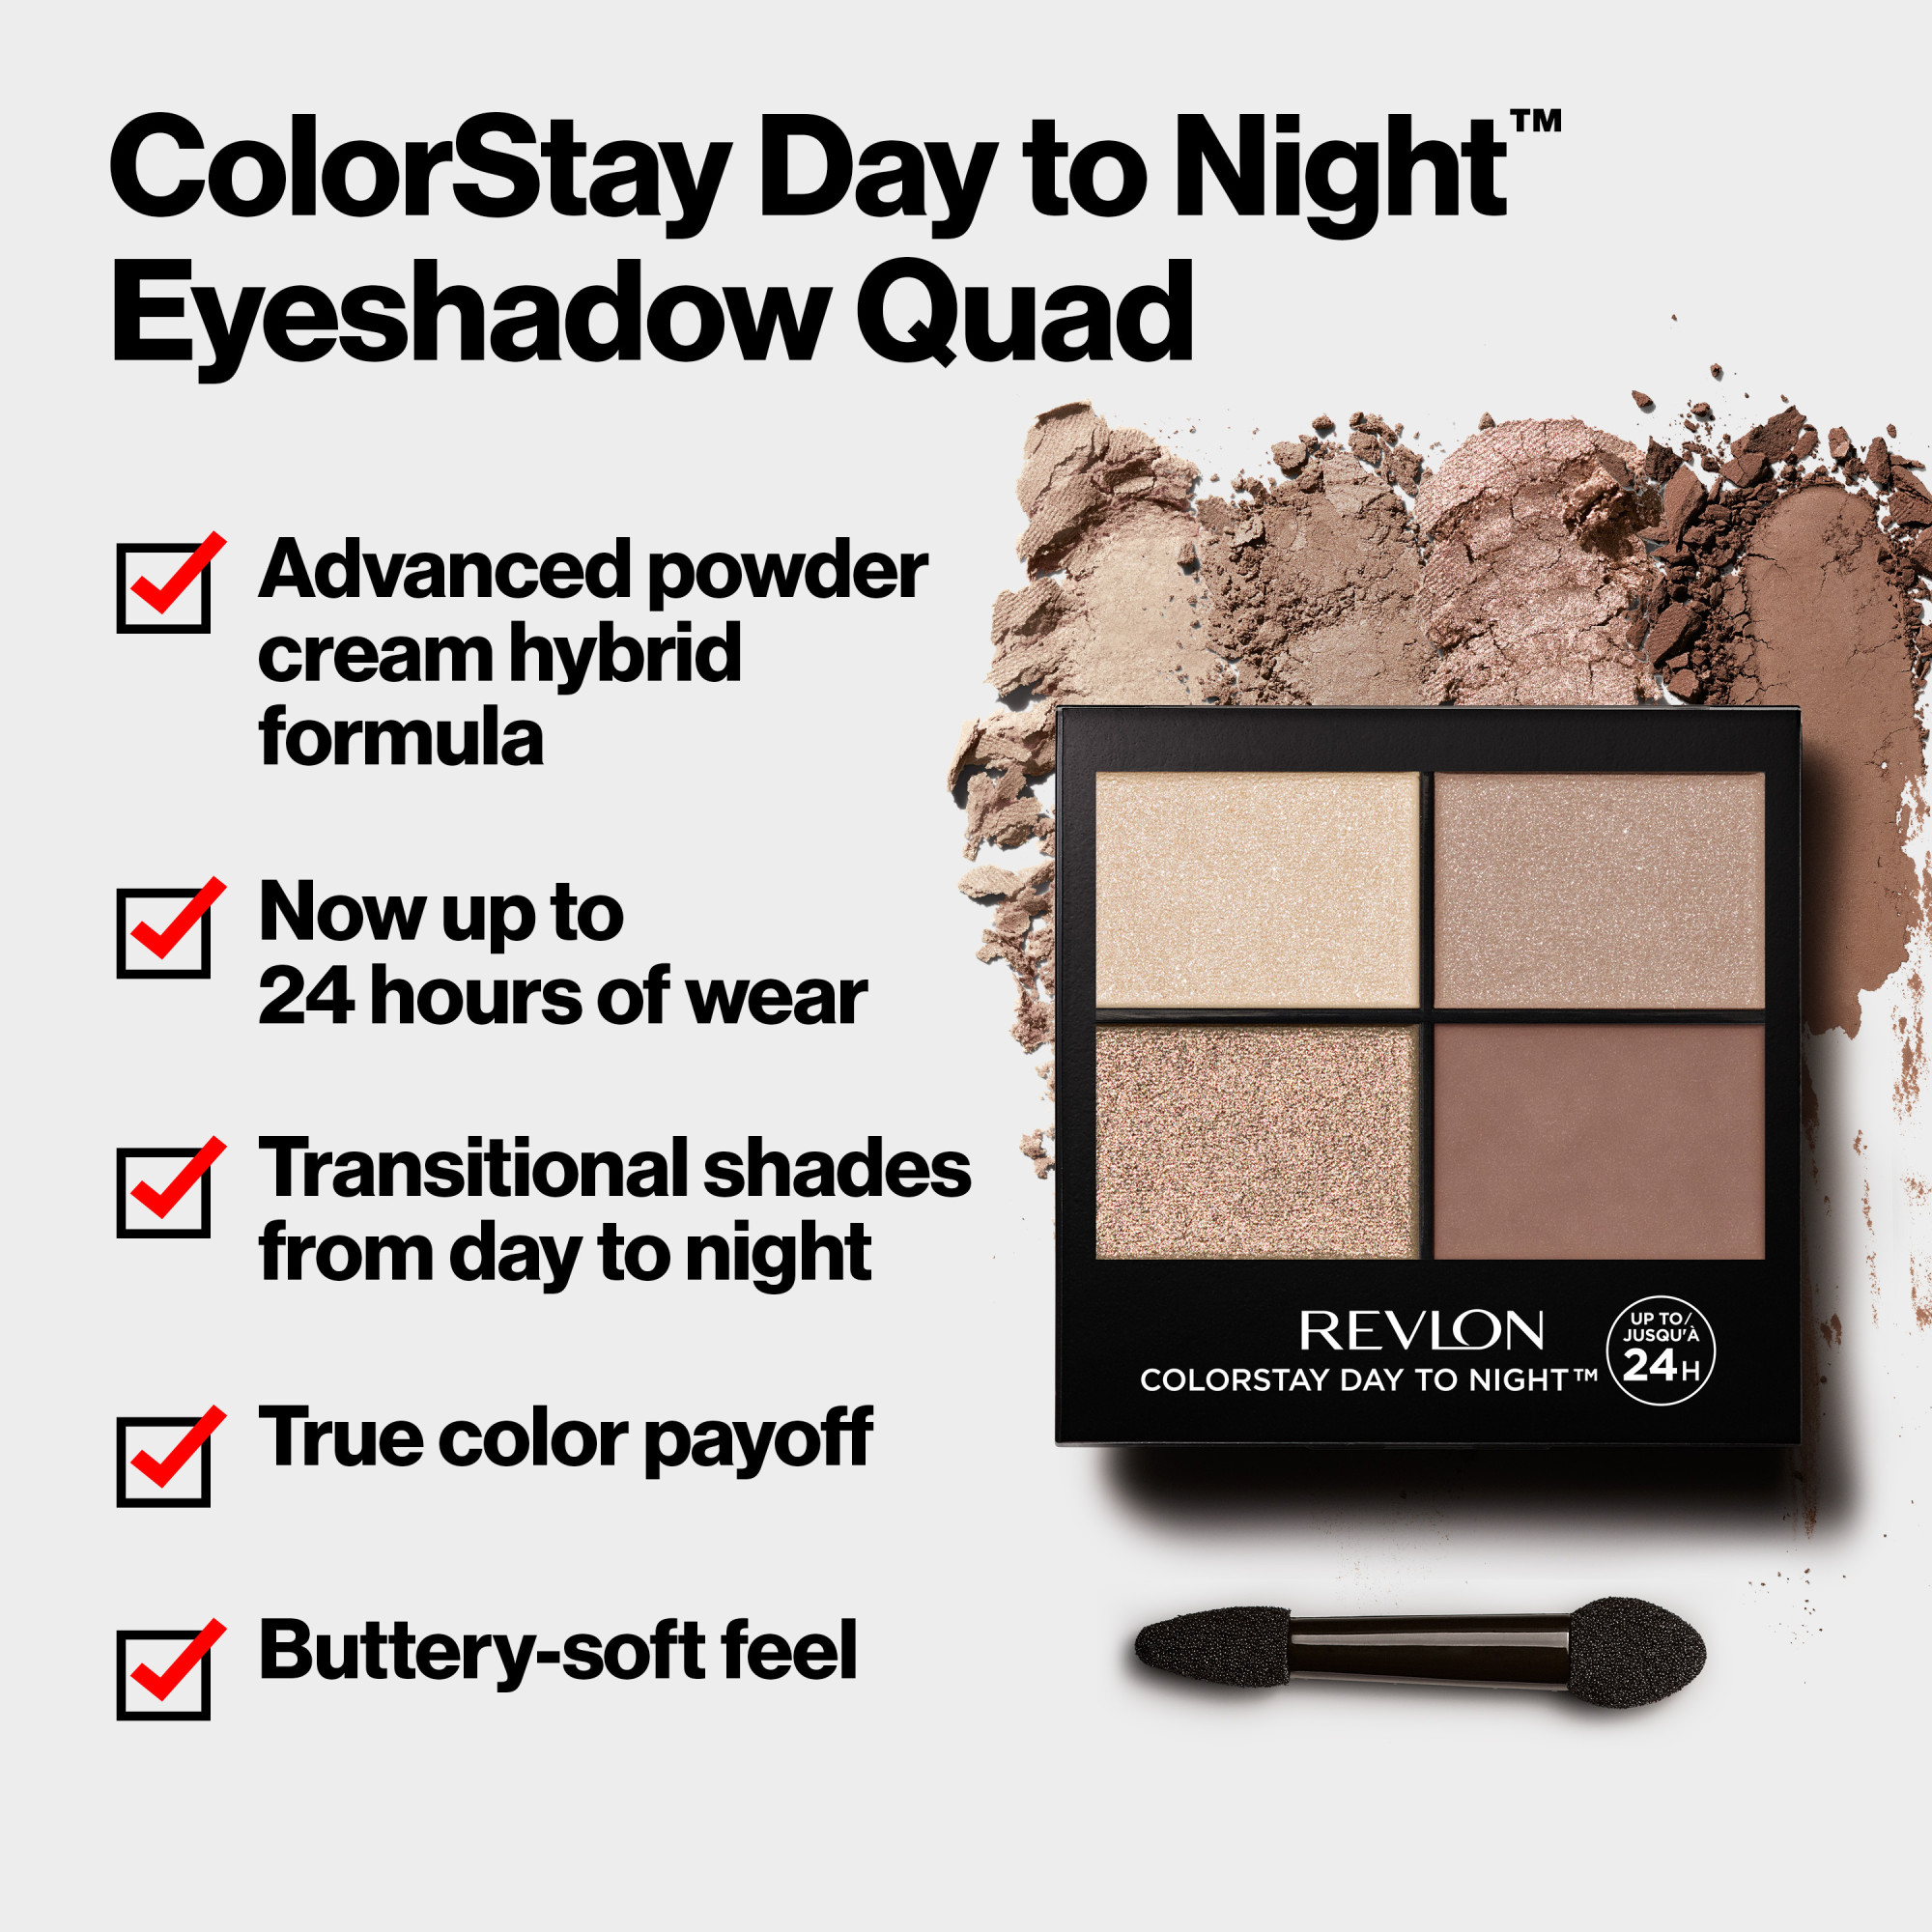 Revlon ColorStay Day to Night Eyeshadow Quad, Longwear Shadow Palette with Transitional Shades and Buttery Soft Feel, Crease & Smudge Proof, 505 Decadent, 0.16 oz - image 5 of 12